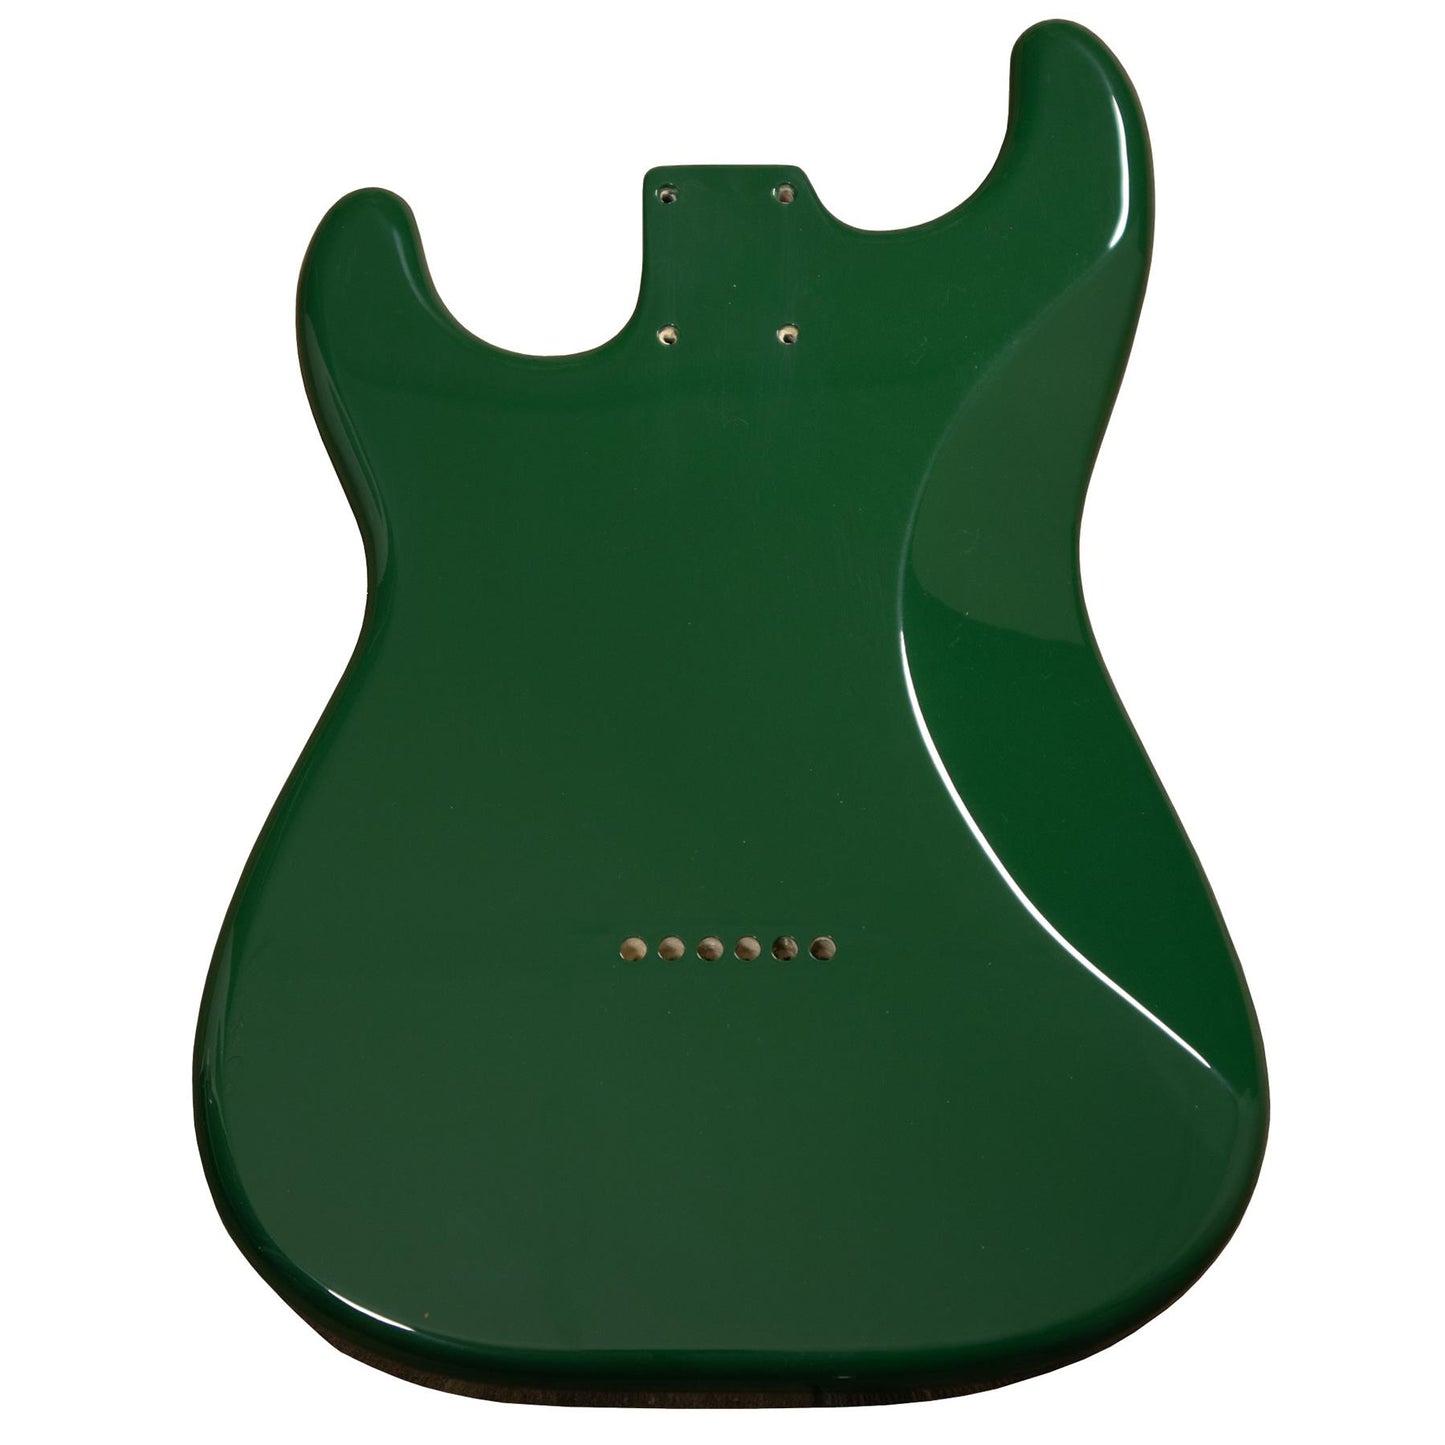 B Stock Sherwood Green Hardtail Stratocaster Compatible Body